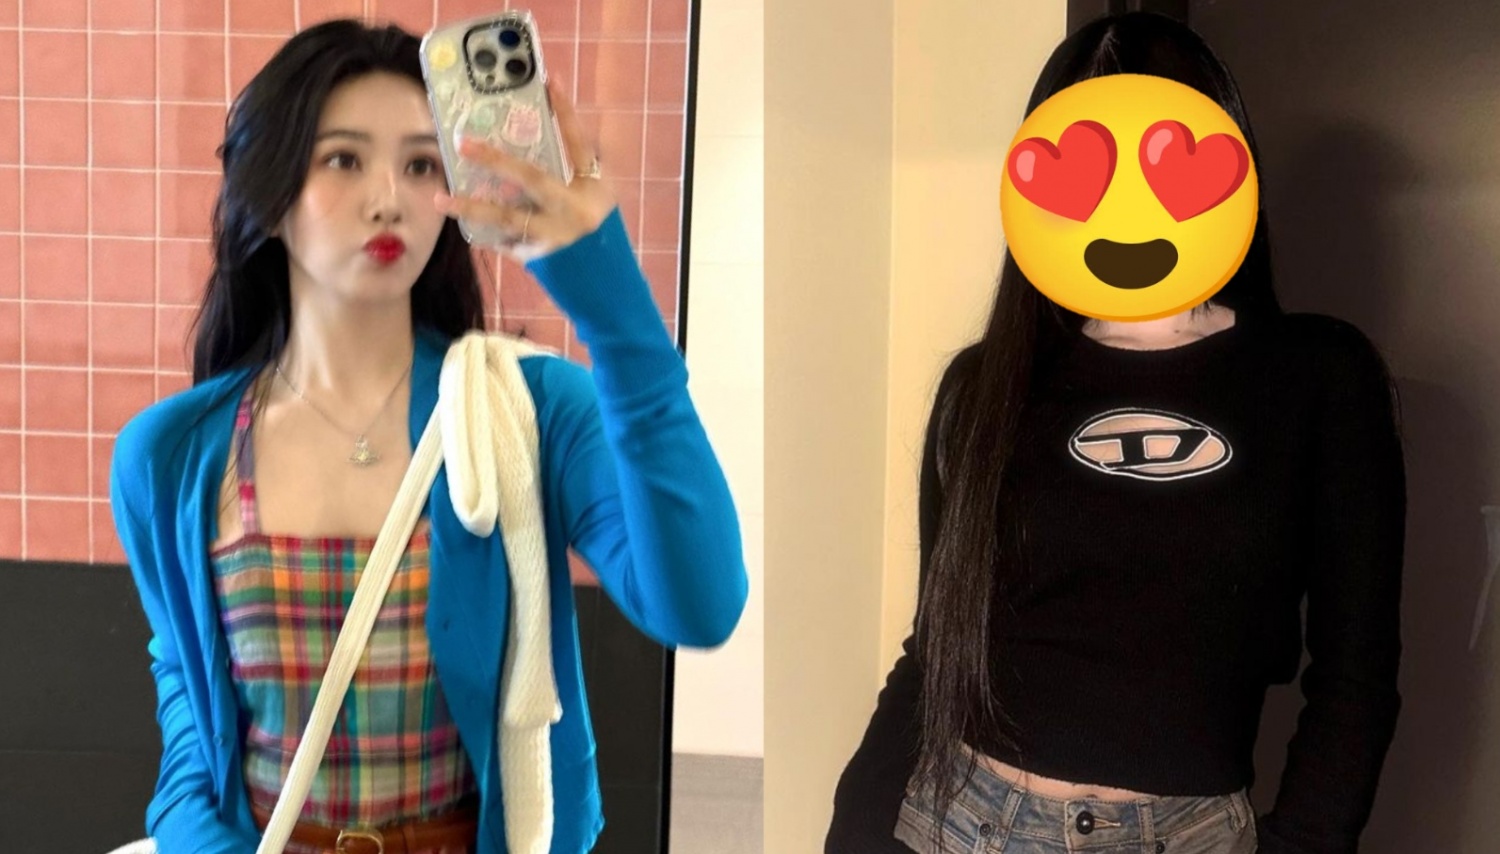 Red Velvet Joy Says She Wants to Protect THIS Junior Idol: 'As Her Older Sister...'